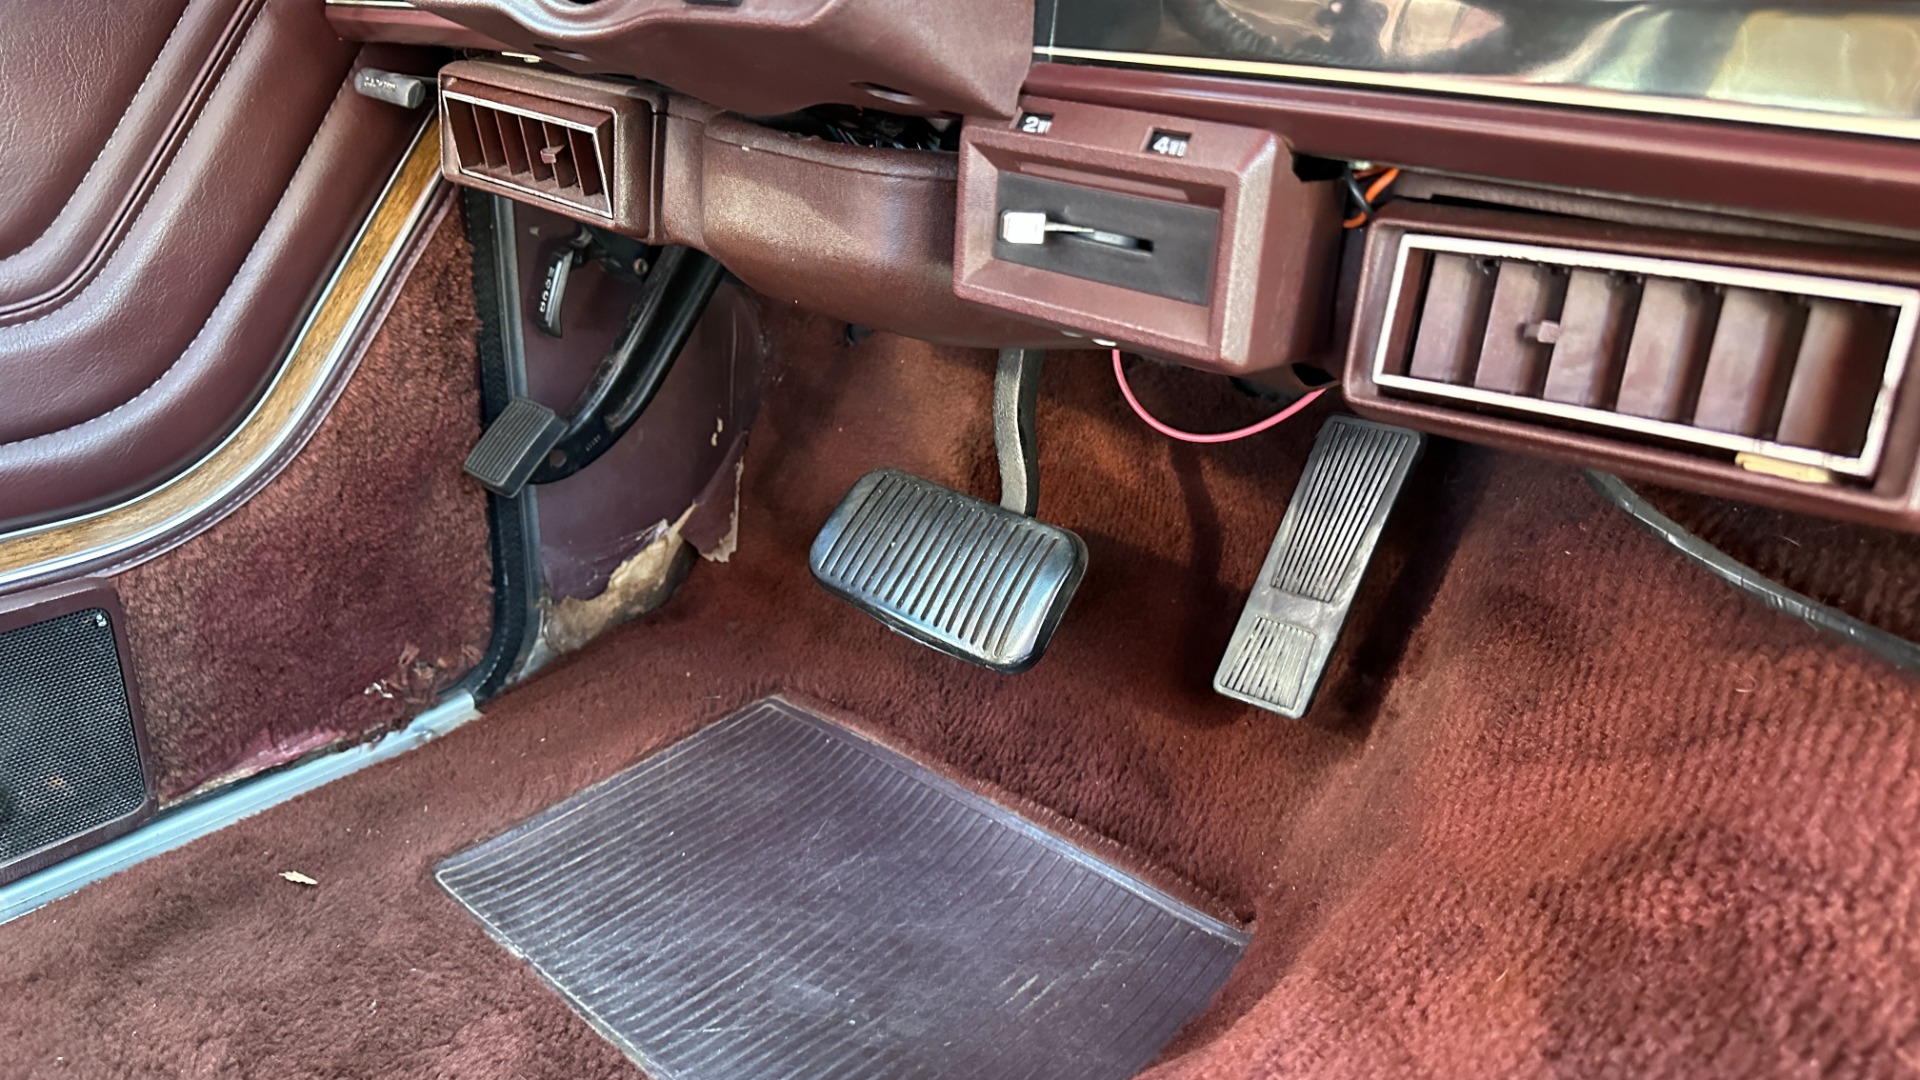 Used 1988 Jeep Grand Wagoneer 5.9L V8 ENGINE / LEATHER AND CLOTH / WOOD SIDING / 4WD for sale $21,995 at Formula Imports in Charlotte NC 28227 61